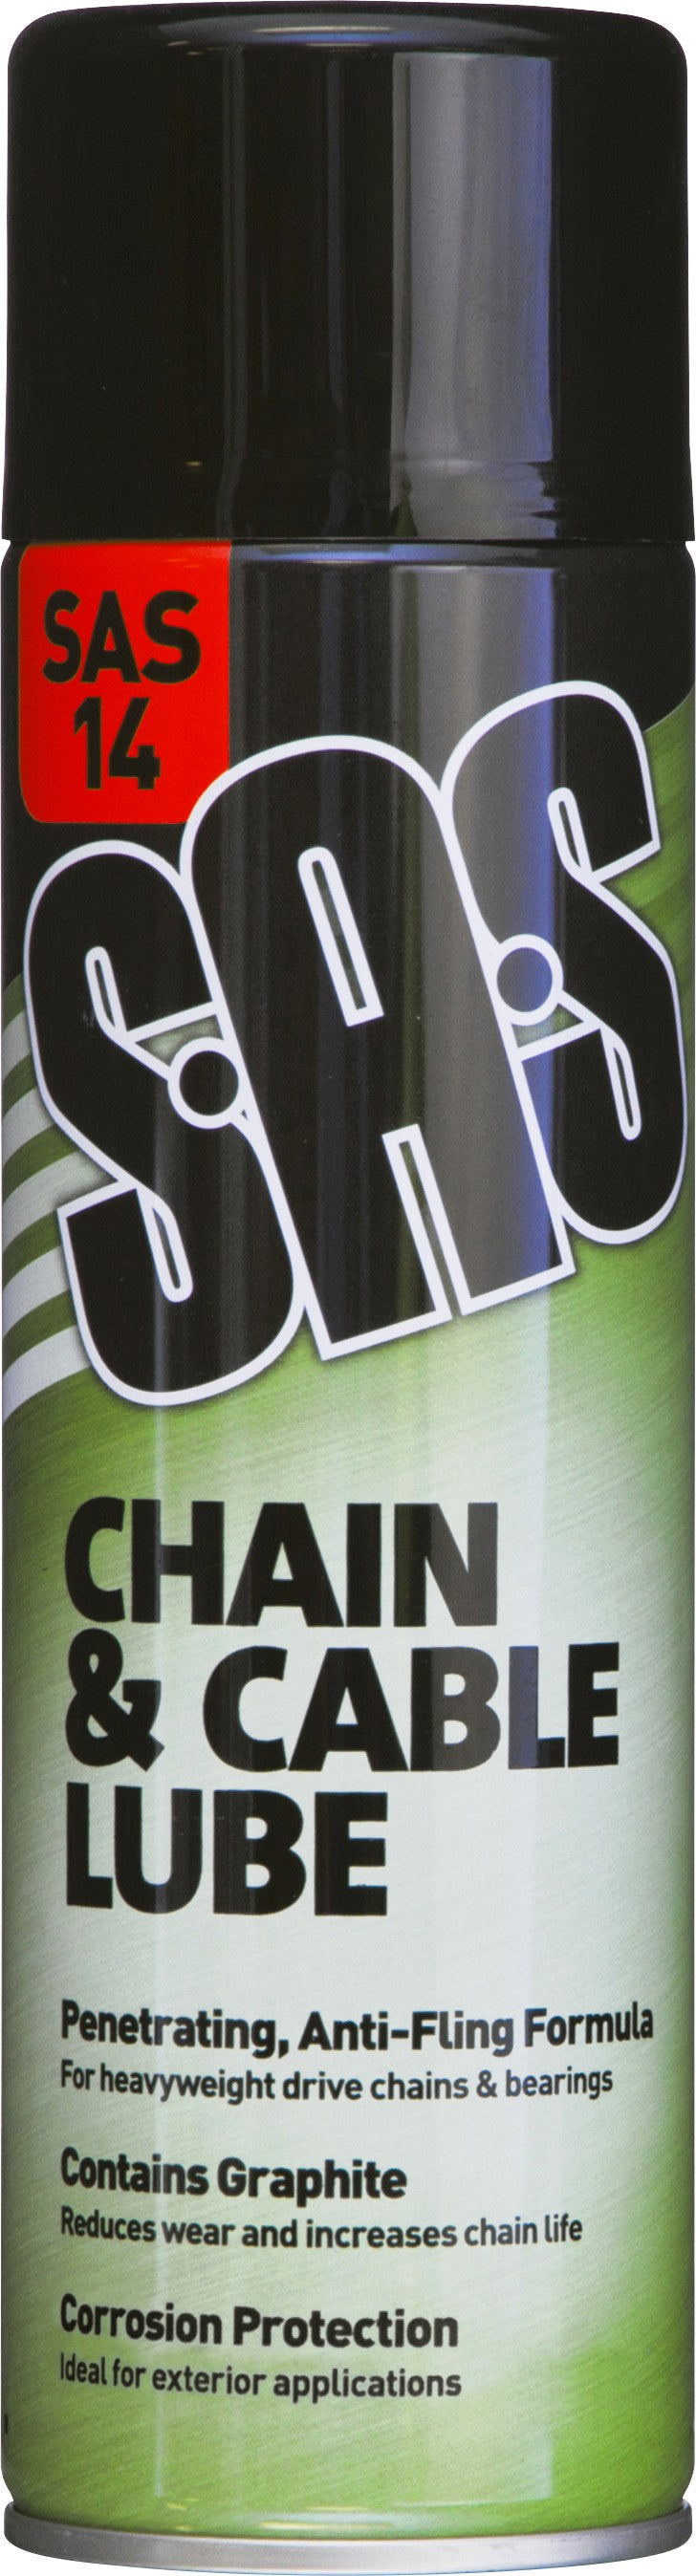 S.A.S Chain & Cable Lube 500ml